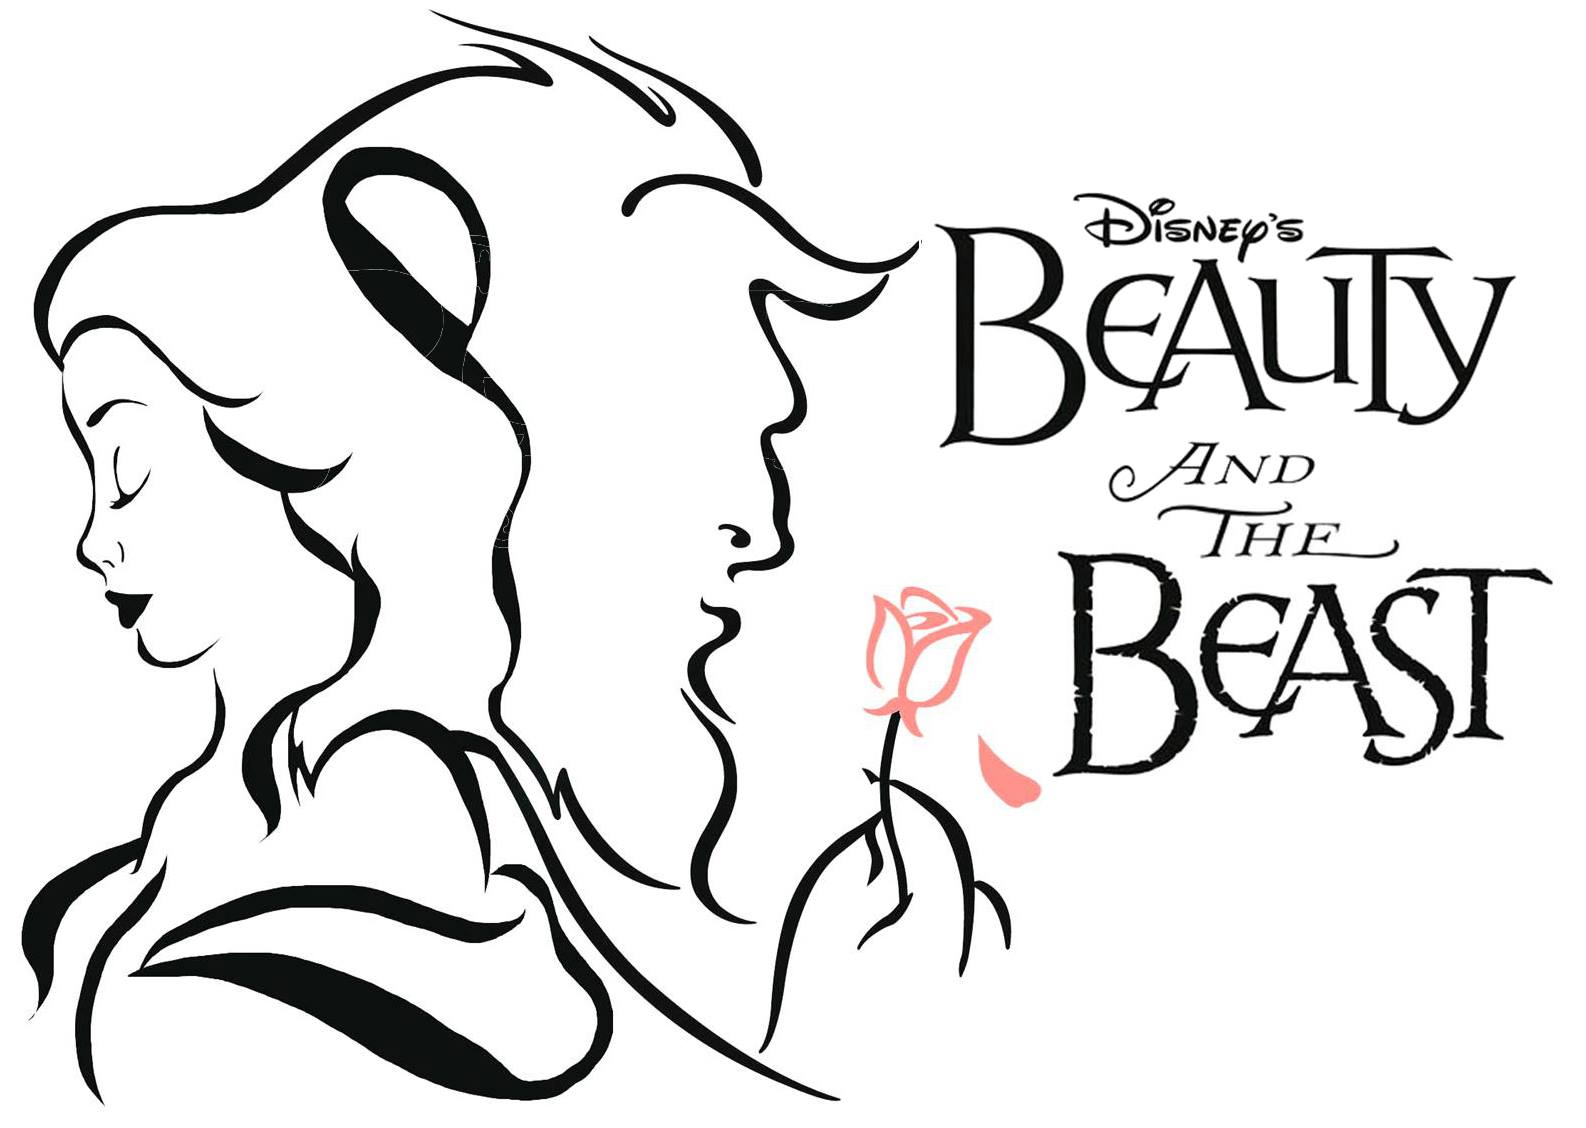 Beauty and the beast black white clipart 4 clipart station jpg